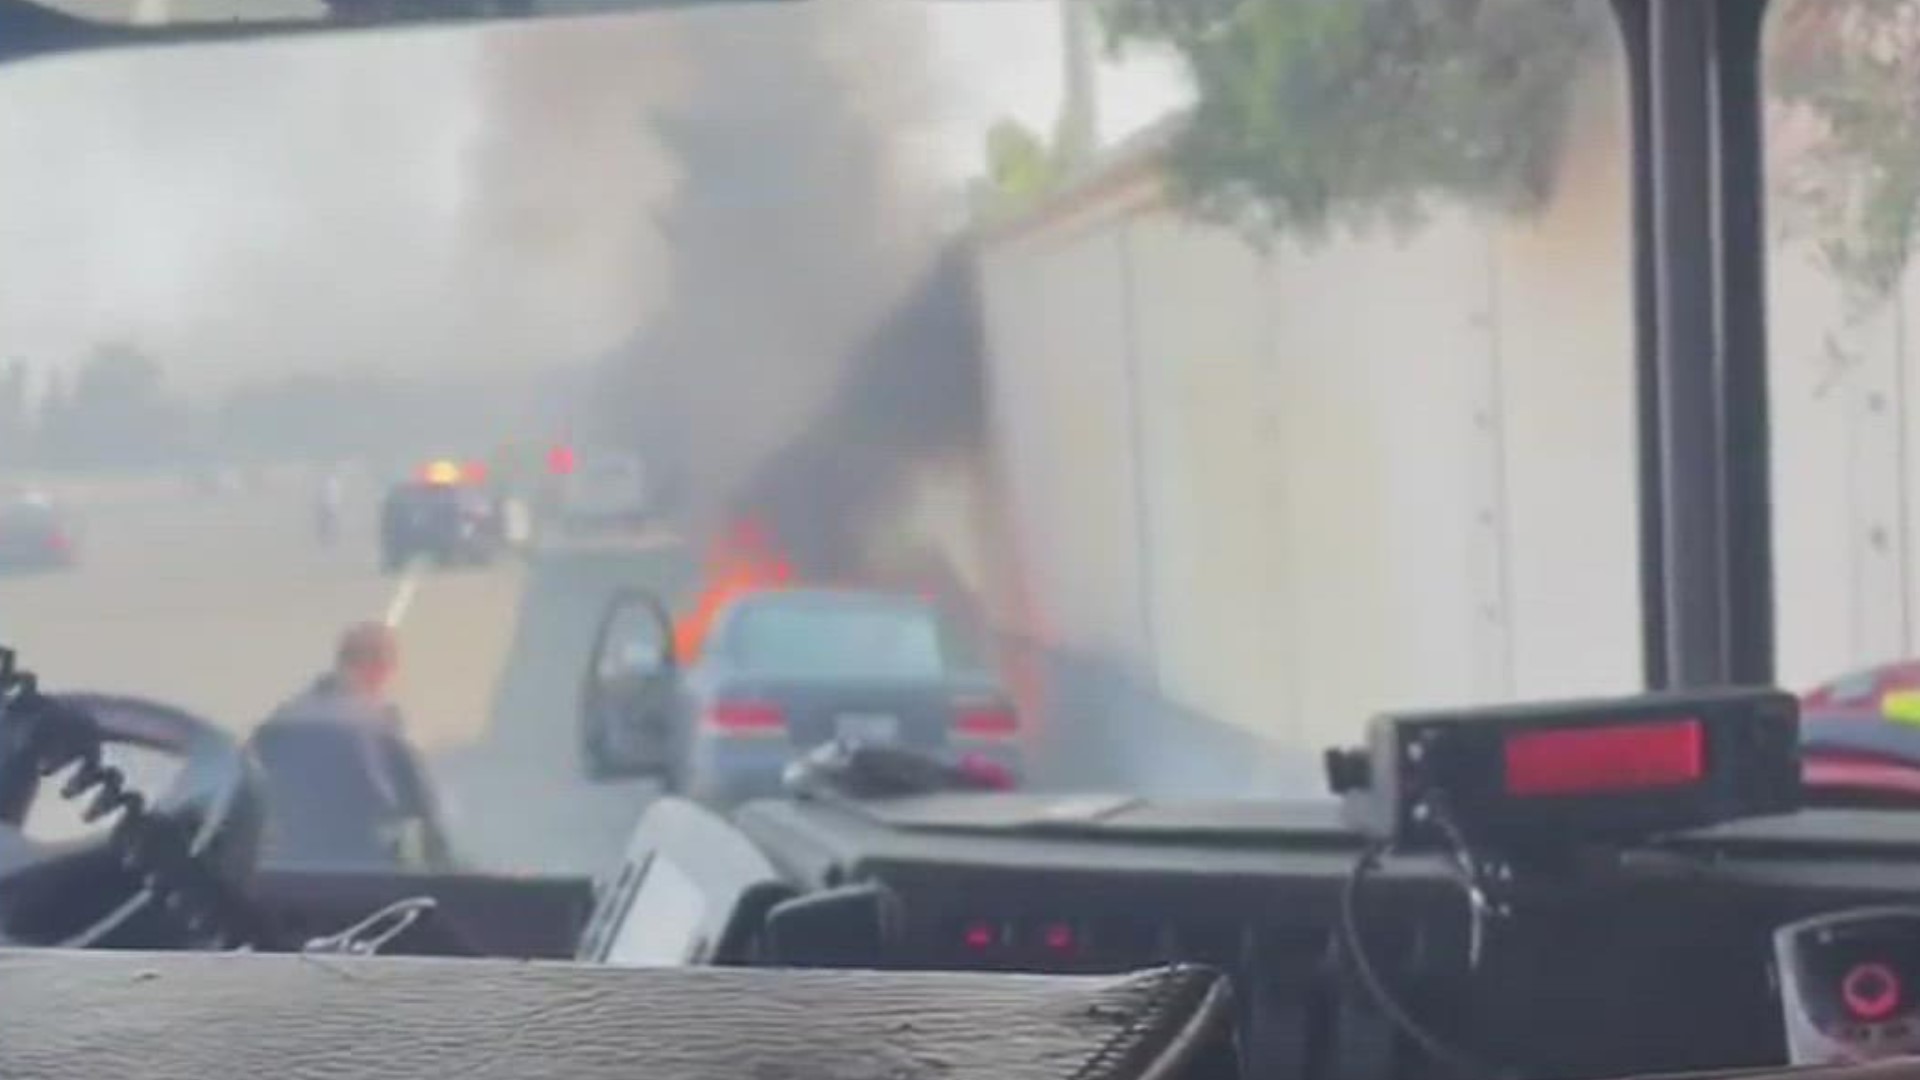 A San Jose police officer saved a man from a burning car.